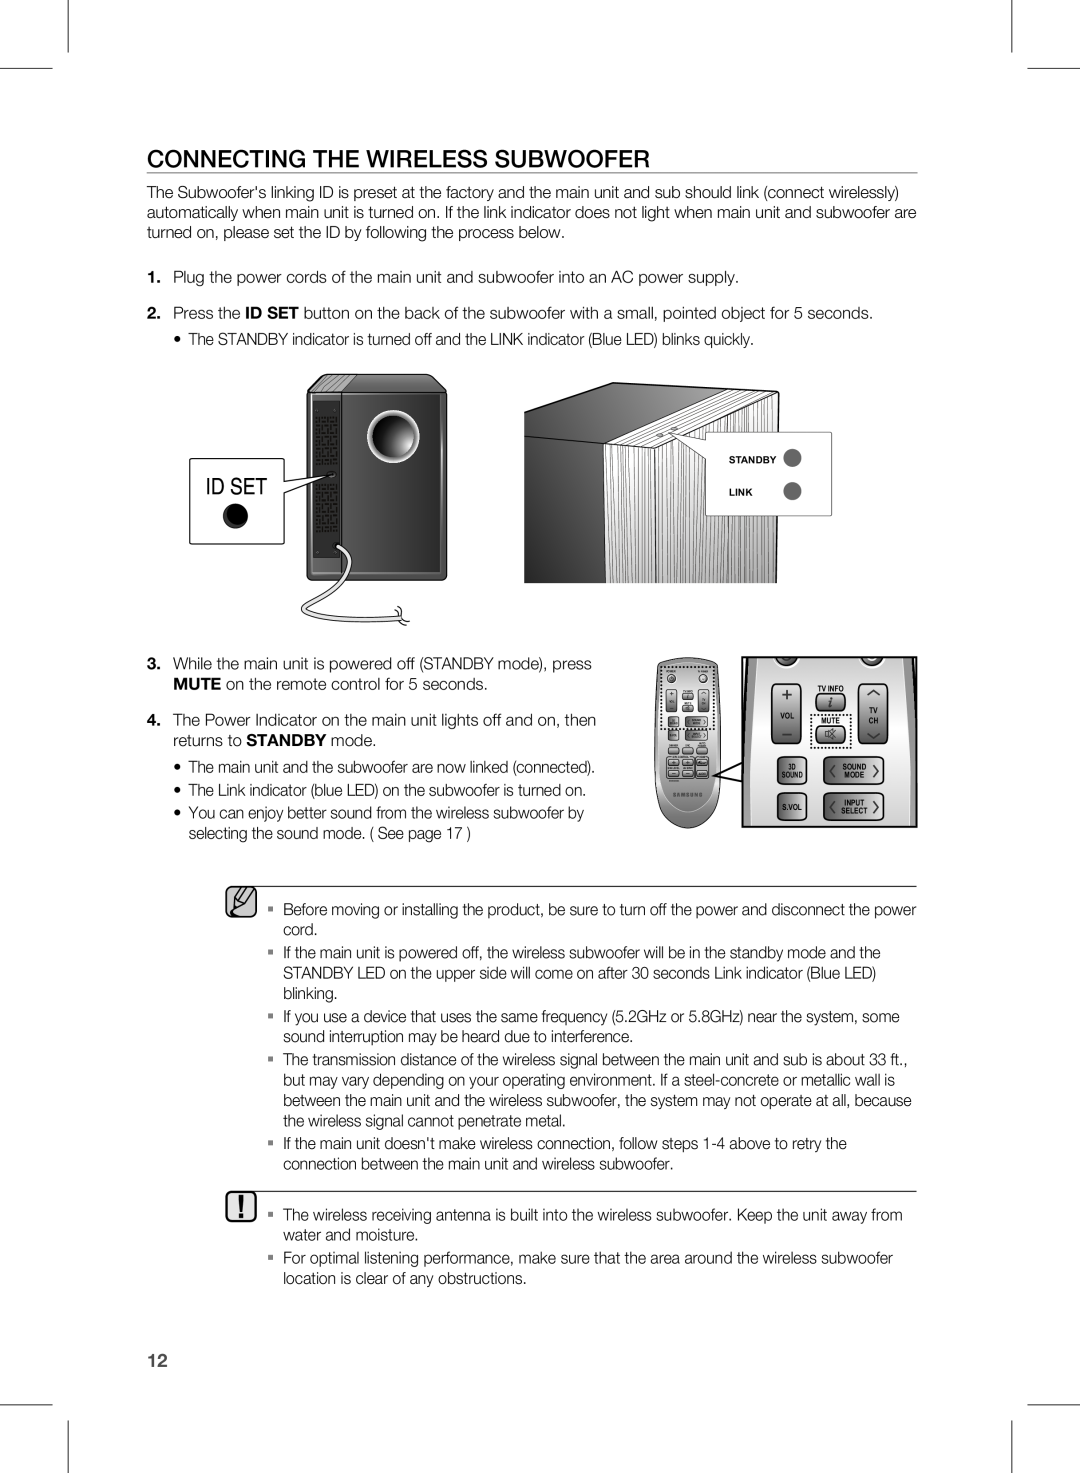 Samsung HW-D450, HW-D451 user manual cOnnEcTing THE WiRElESS SUBWOOFER 